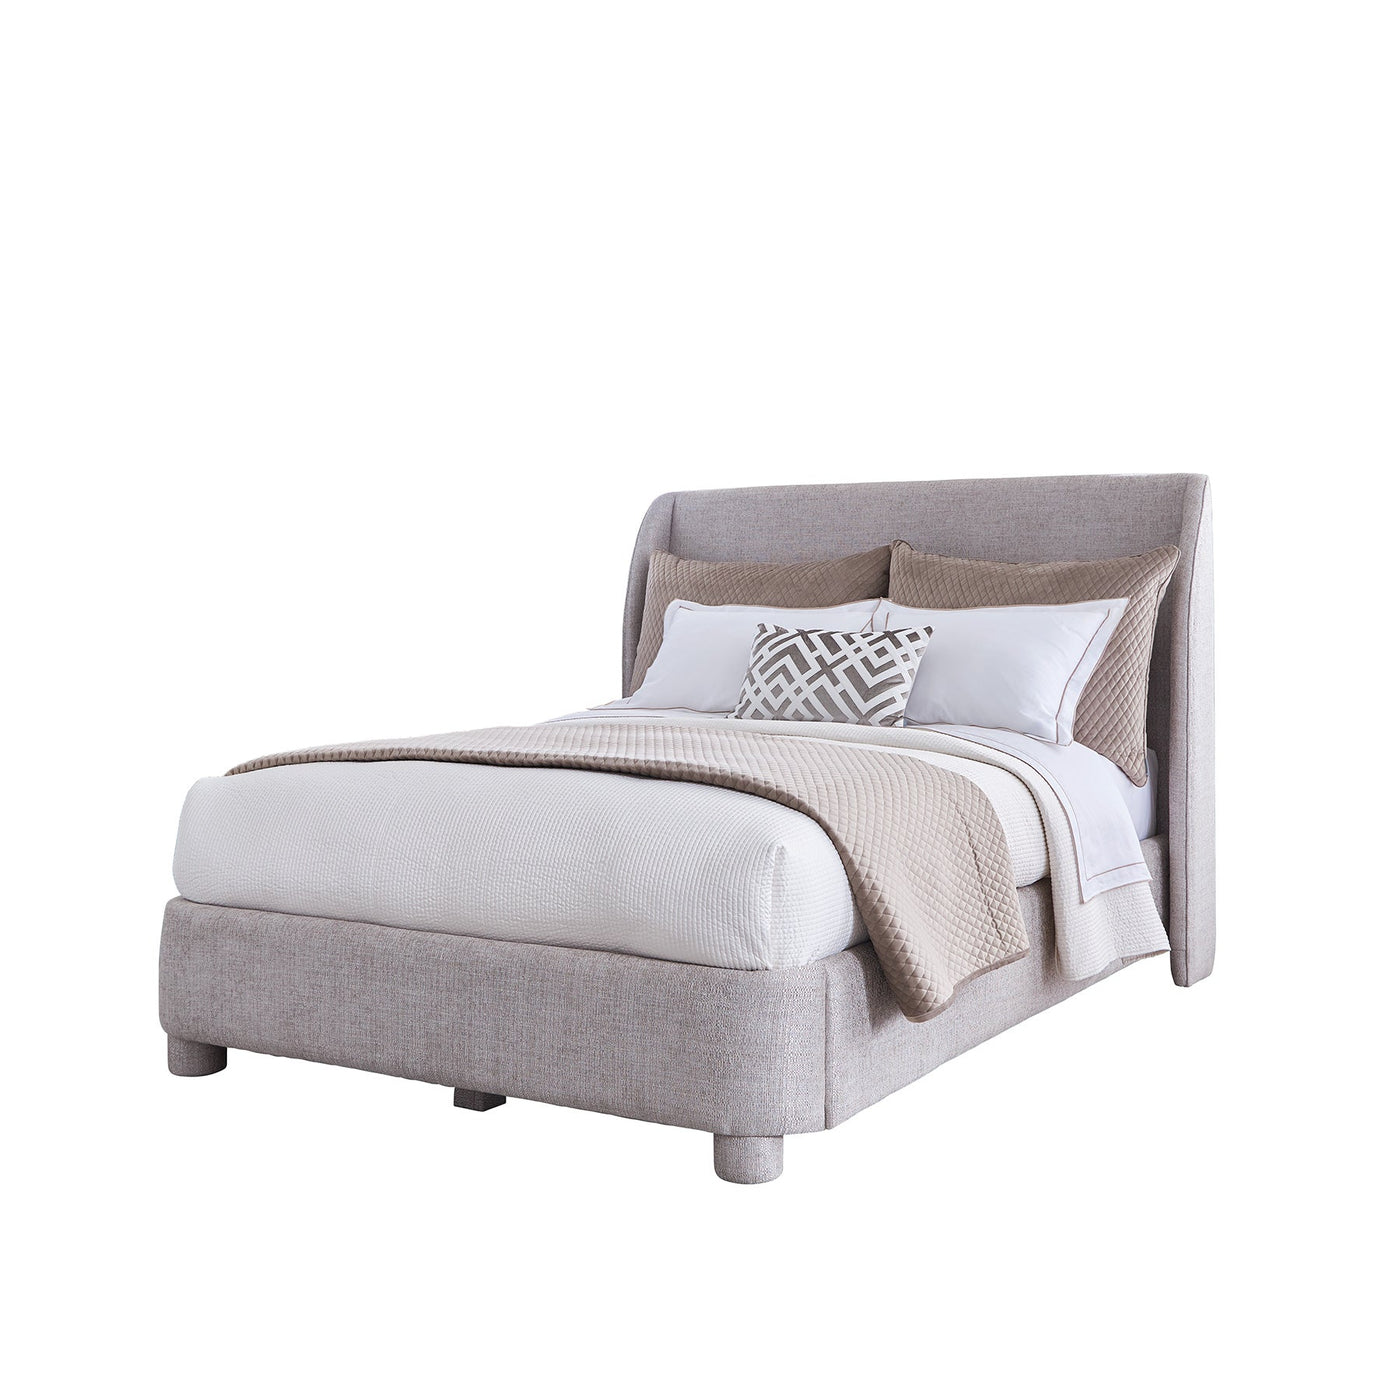 Serena Bed (Grey Woven Chenille / Cal King)